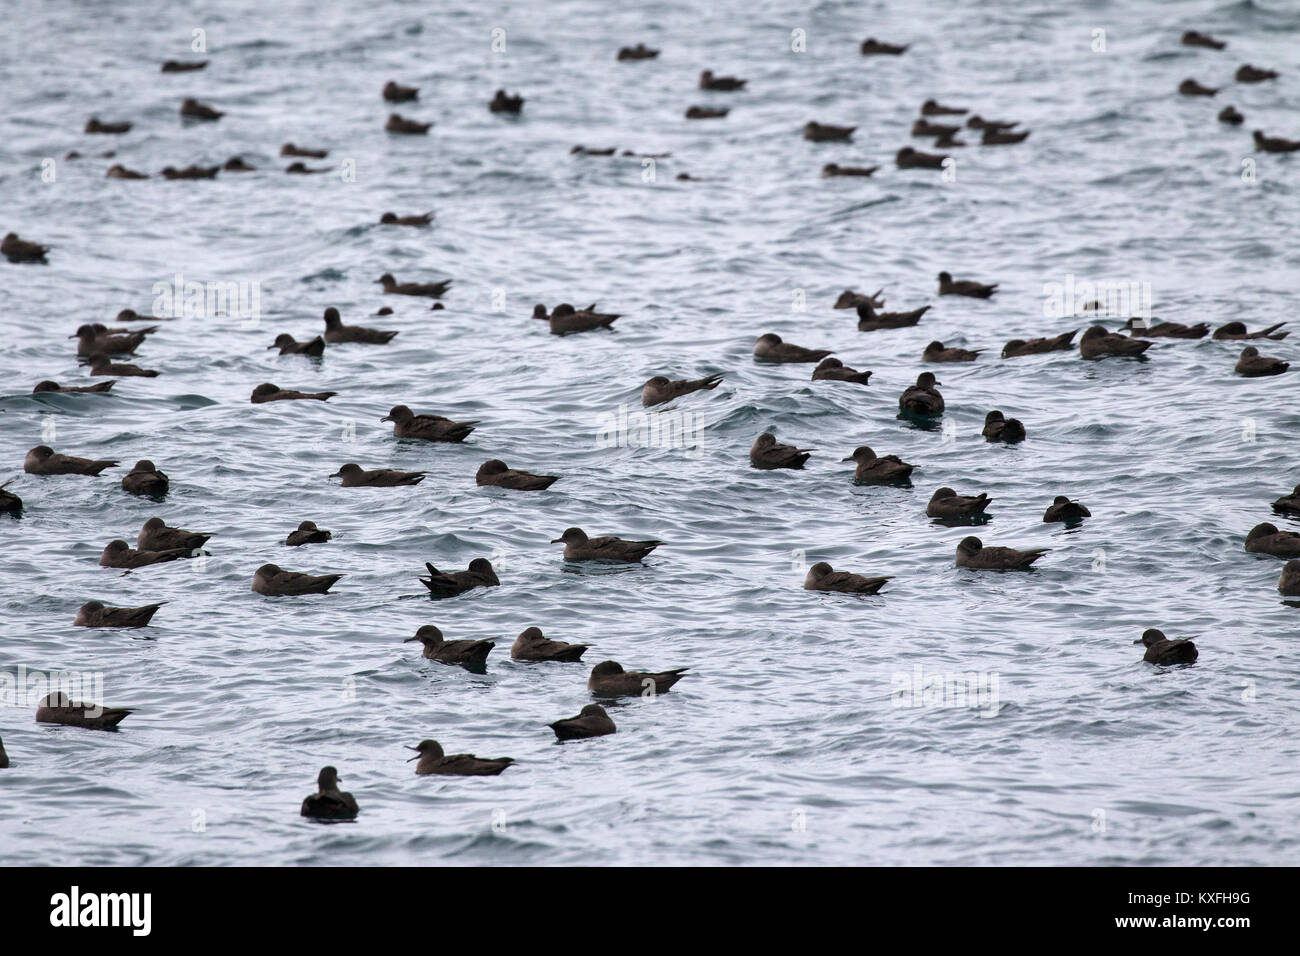 Sooty shearwater Puffinus griseus flock off Kidney Island, Falkland Islands in the Southern Atlantic Ocean Stock Photo